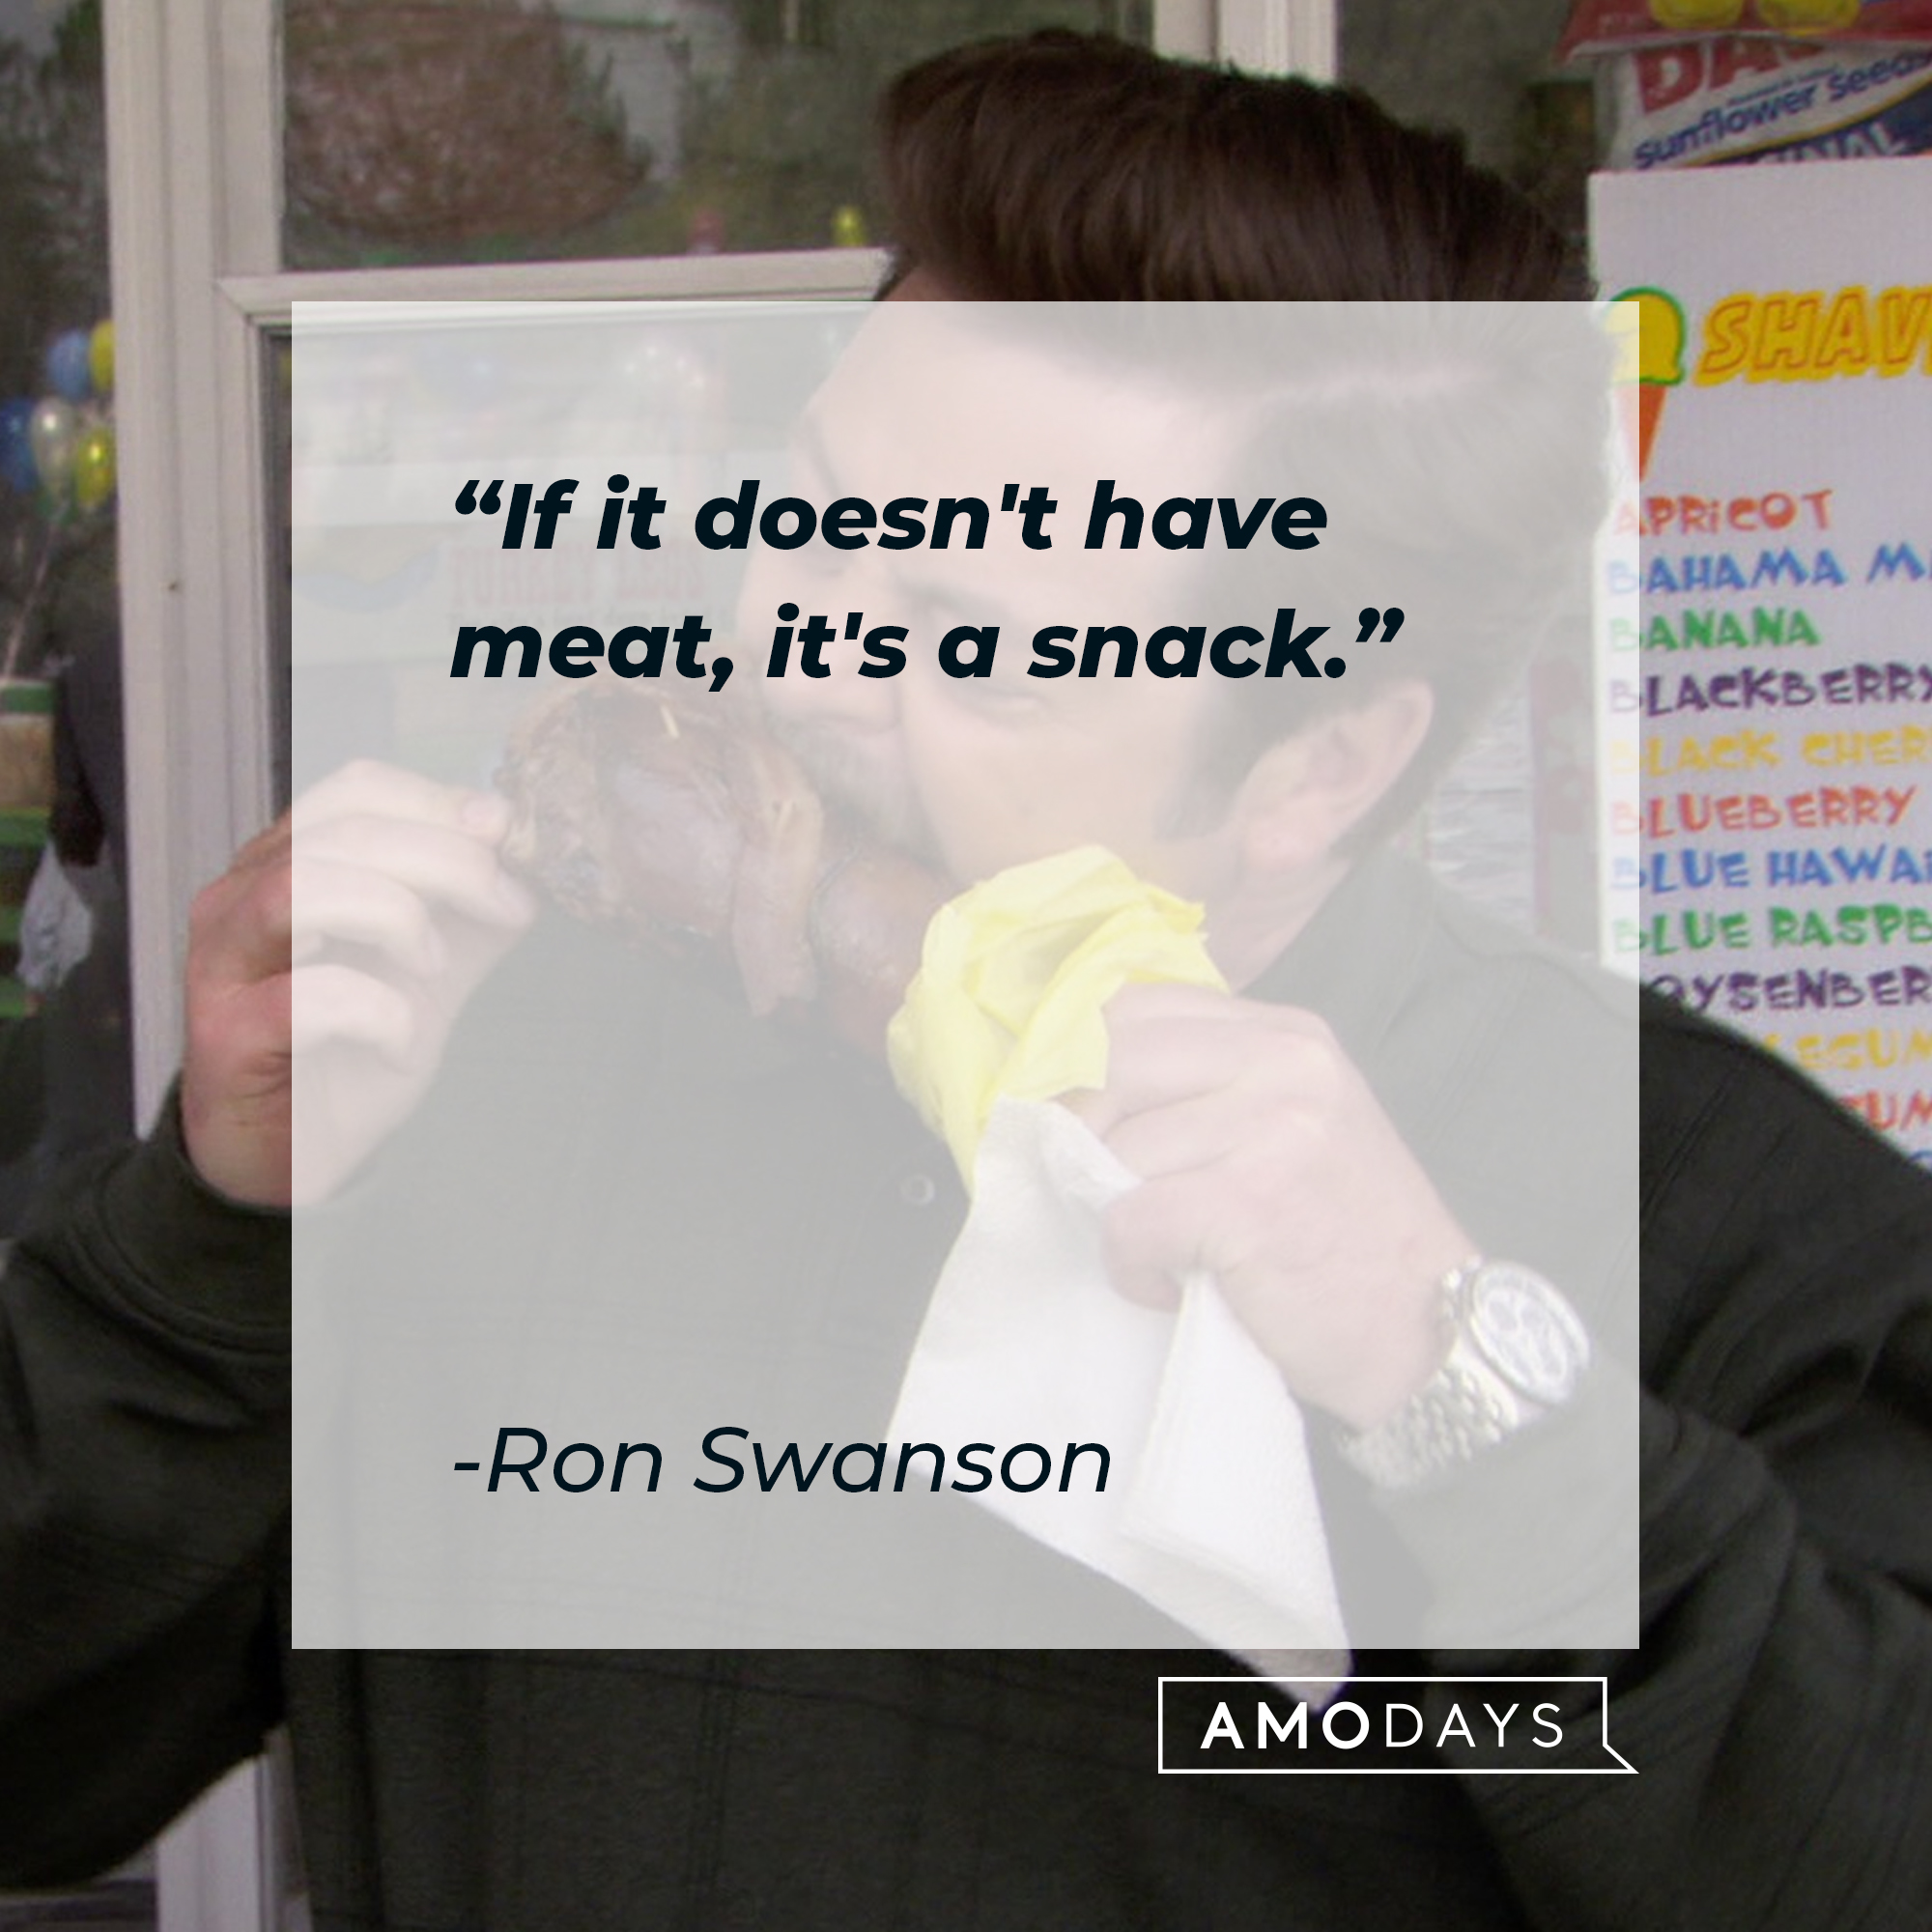 Ron Swanson’s quote: "If it doesn't have meat, it's a snack." | Image: Facebook.com/parksandrecreation